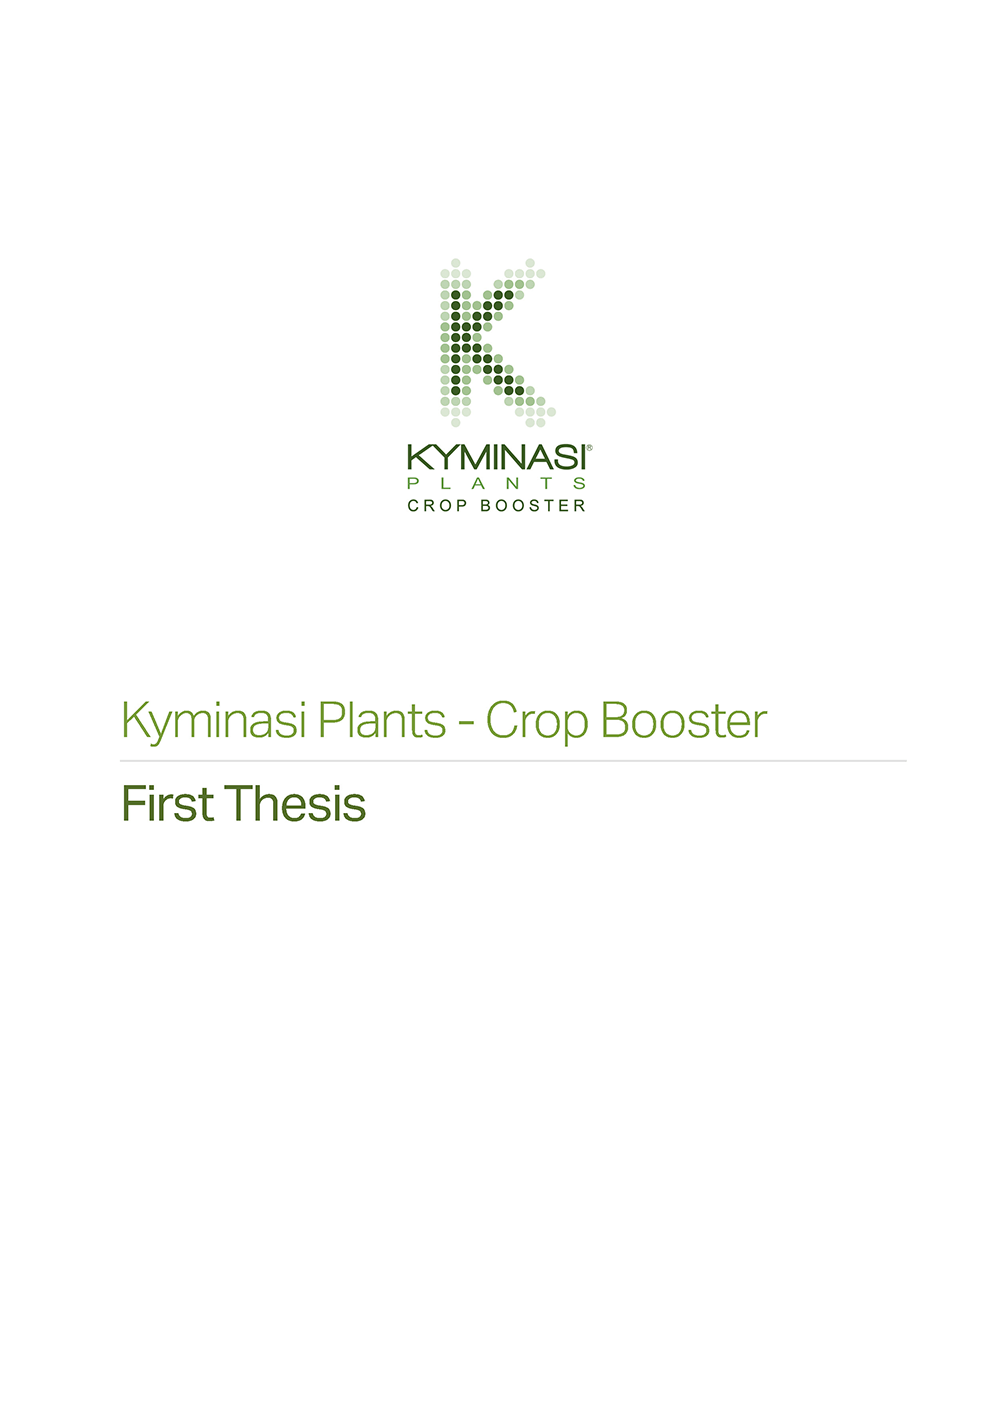 Kyminasi Plants Crop Booster White paper - First Thesis